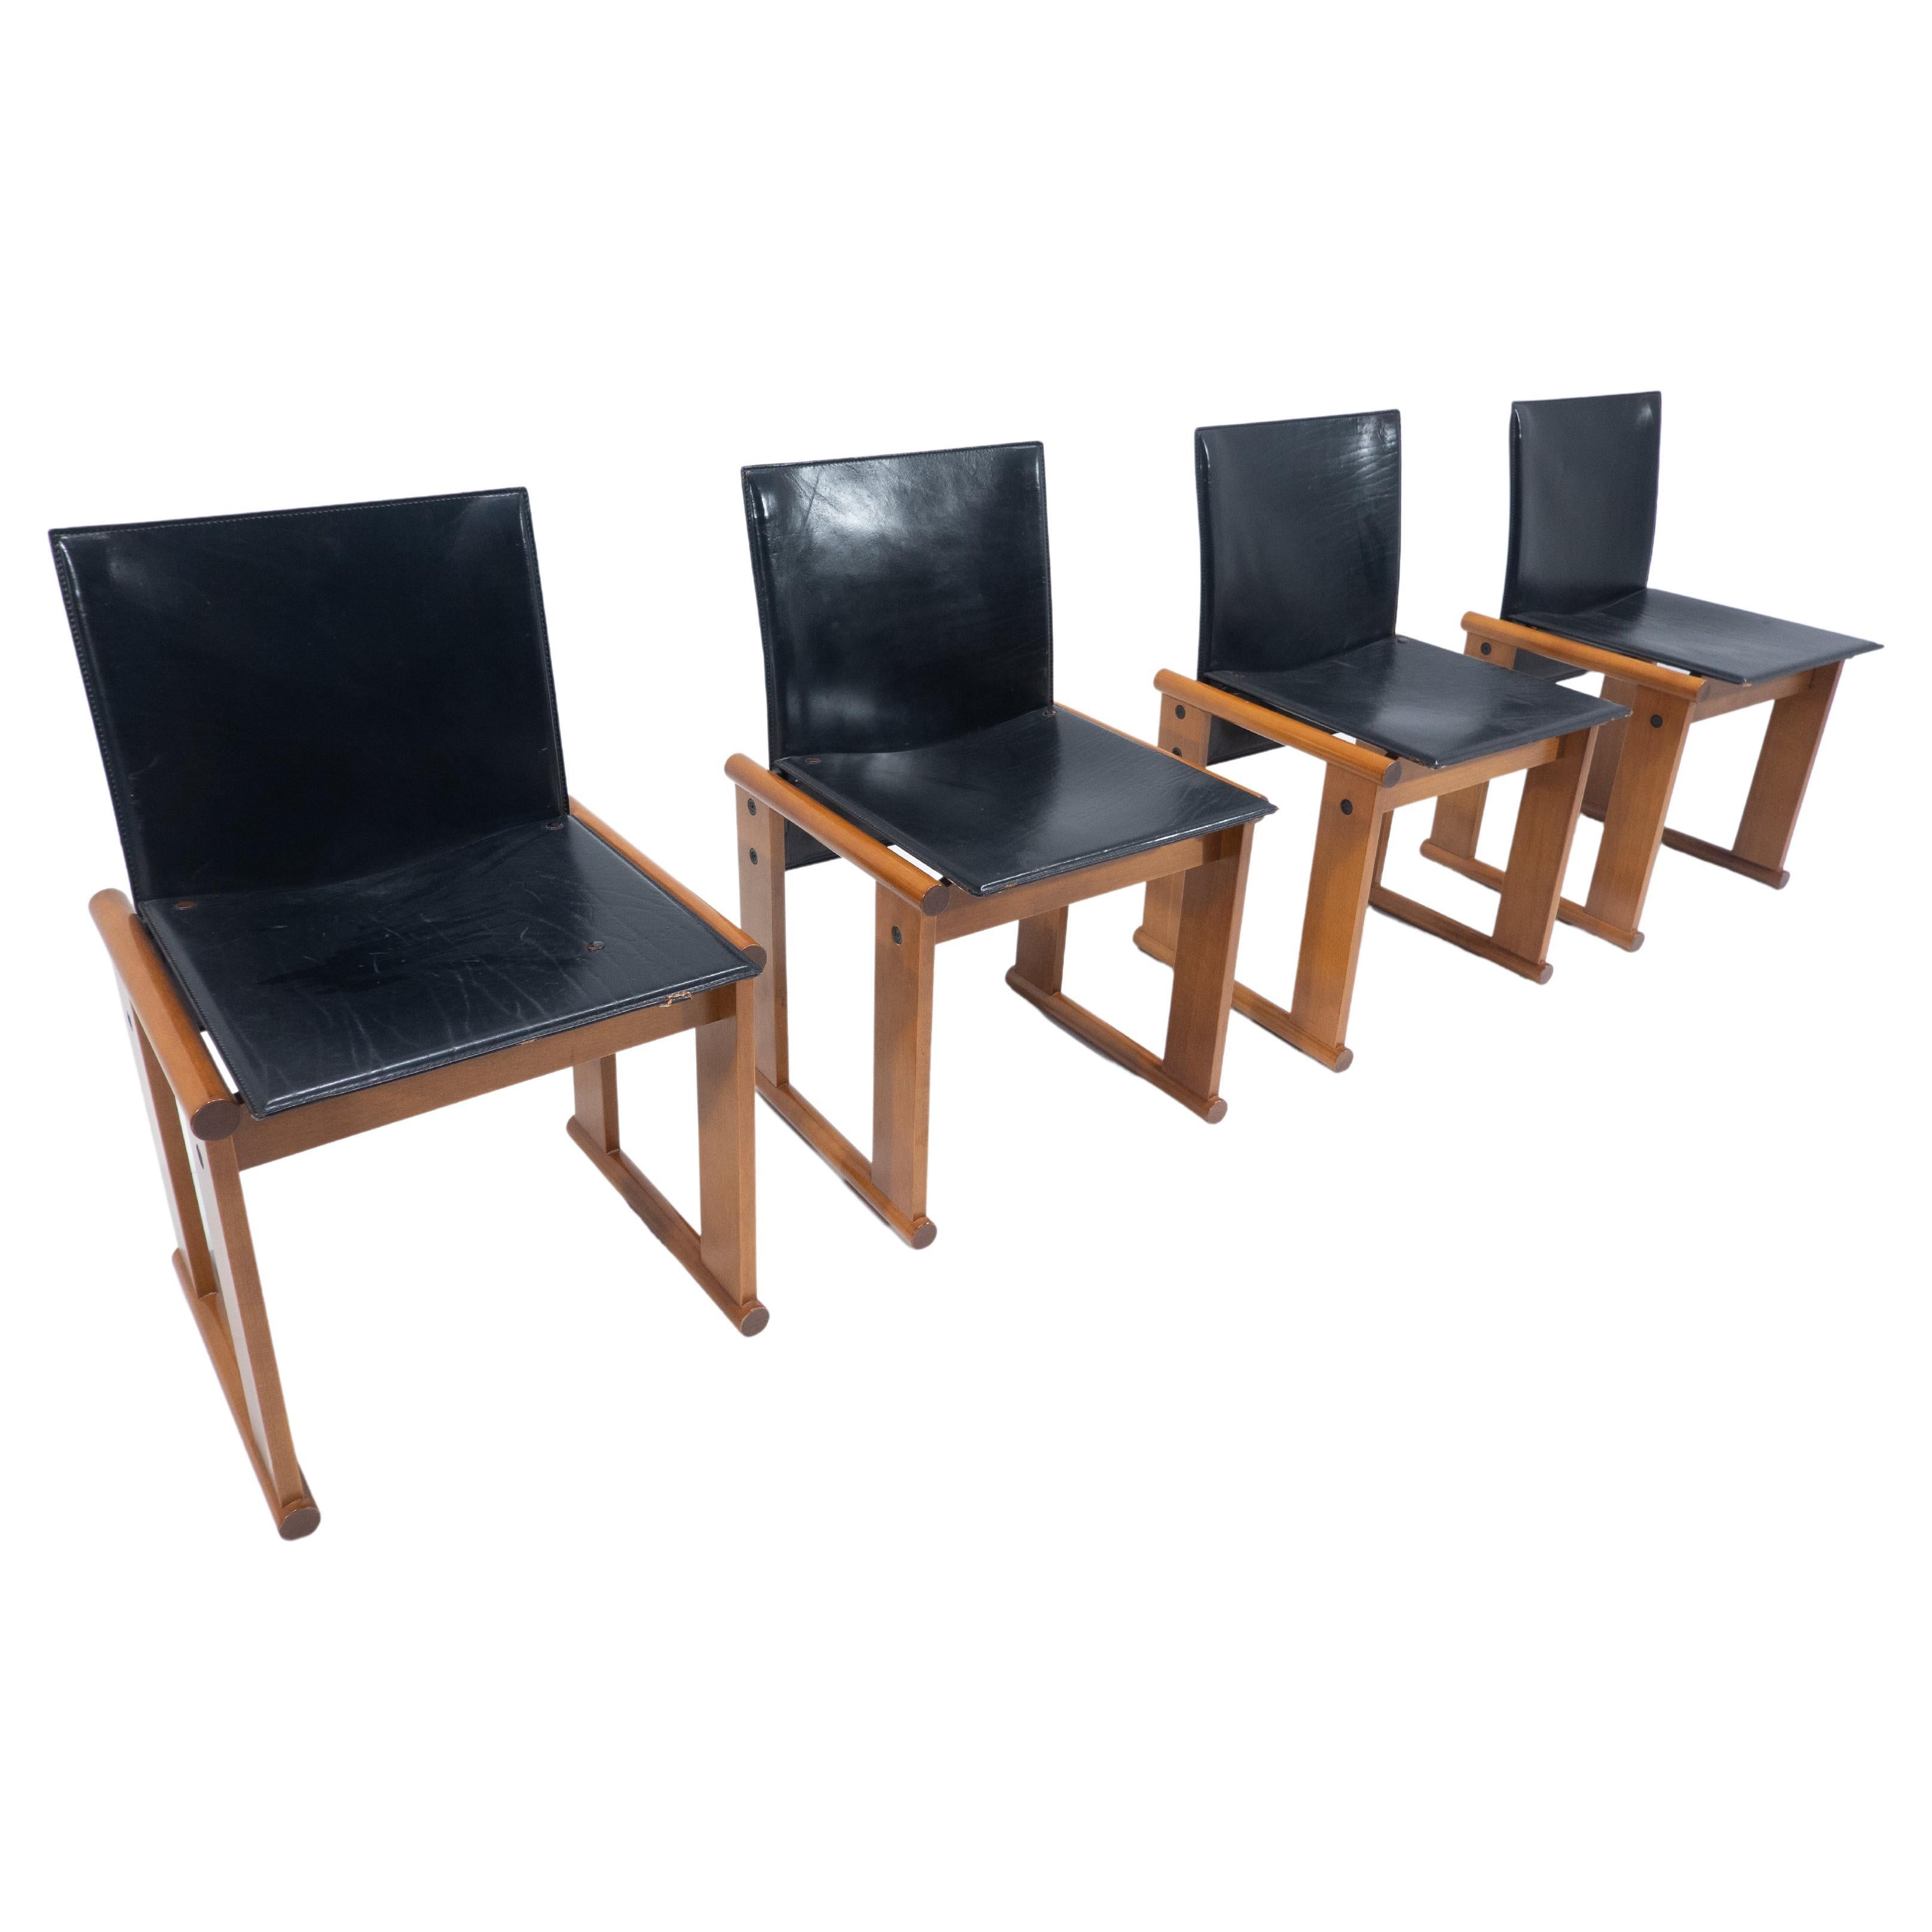 Mid-Century Modern Set of 4 Chairs by Afra and Tobia Scarpa, Italy, 1960s For Sale